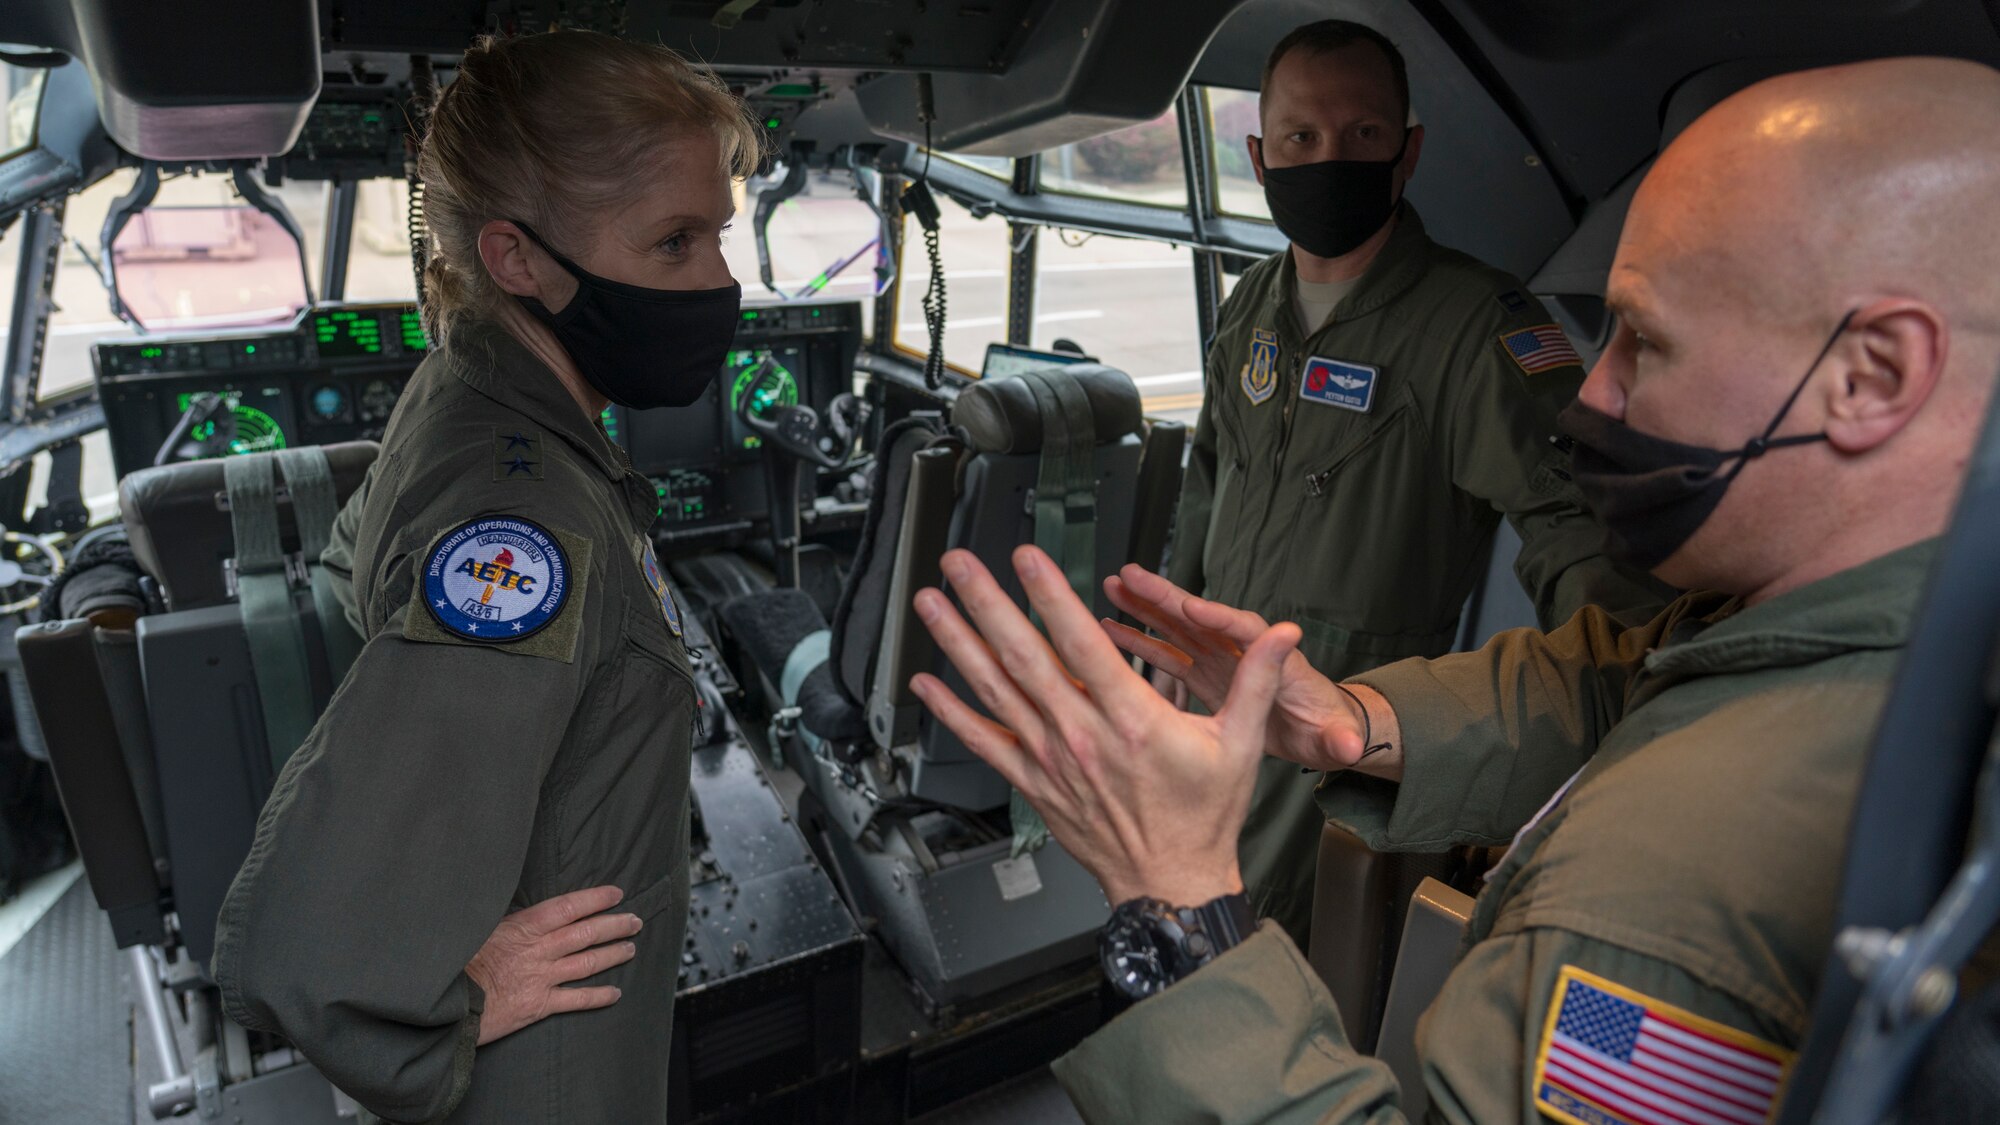 Maj. Gen. Jeannie M. Levitt, director of operations and communications for the Air and Education Training Command at Joint Base San Antonio-Randolph, Texas, learns about the 53rd Weather Reconnaissance Squadron "Hurricane Hunters" from Capt. Peyton Eustis (center), pilot for the 53rd WRS, and Master Sgt. Ed Scherzer (right), loadmaster for the 53rd WRS, during a visit at Keesler Air Force Base, Miss., March 19, 2021. After joining the Air Force in 1992, Leavitt became the branch's first female fighter pilot in 1993. She visited the 81st Training Wing and the Air Force Reserve's 403rd Wing, and she spoke to members of Team Keesler during an event recognizing International Women's History Month. (U.S. Air Force photo by Staff Sgt. Kristen Pittman)